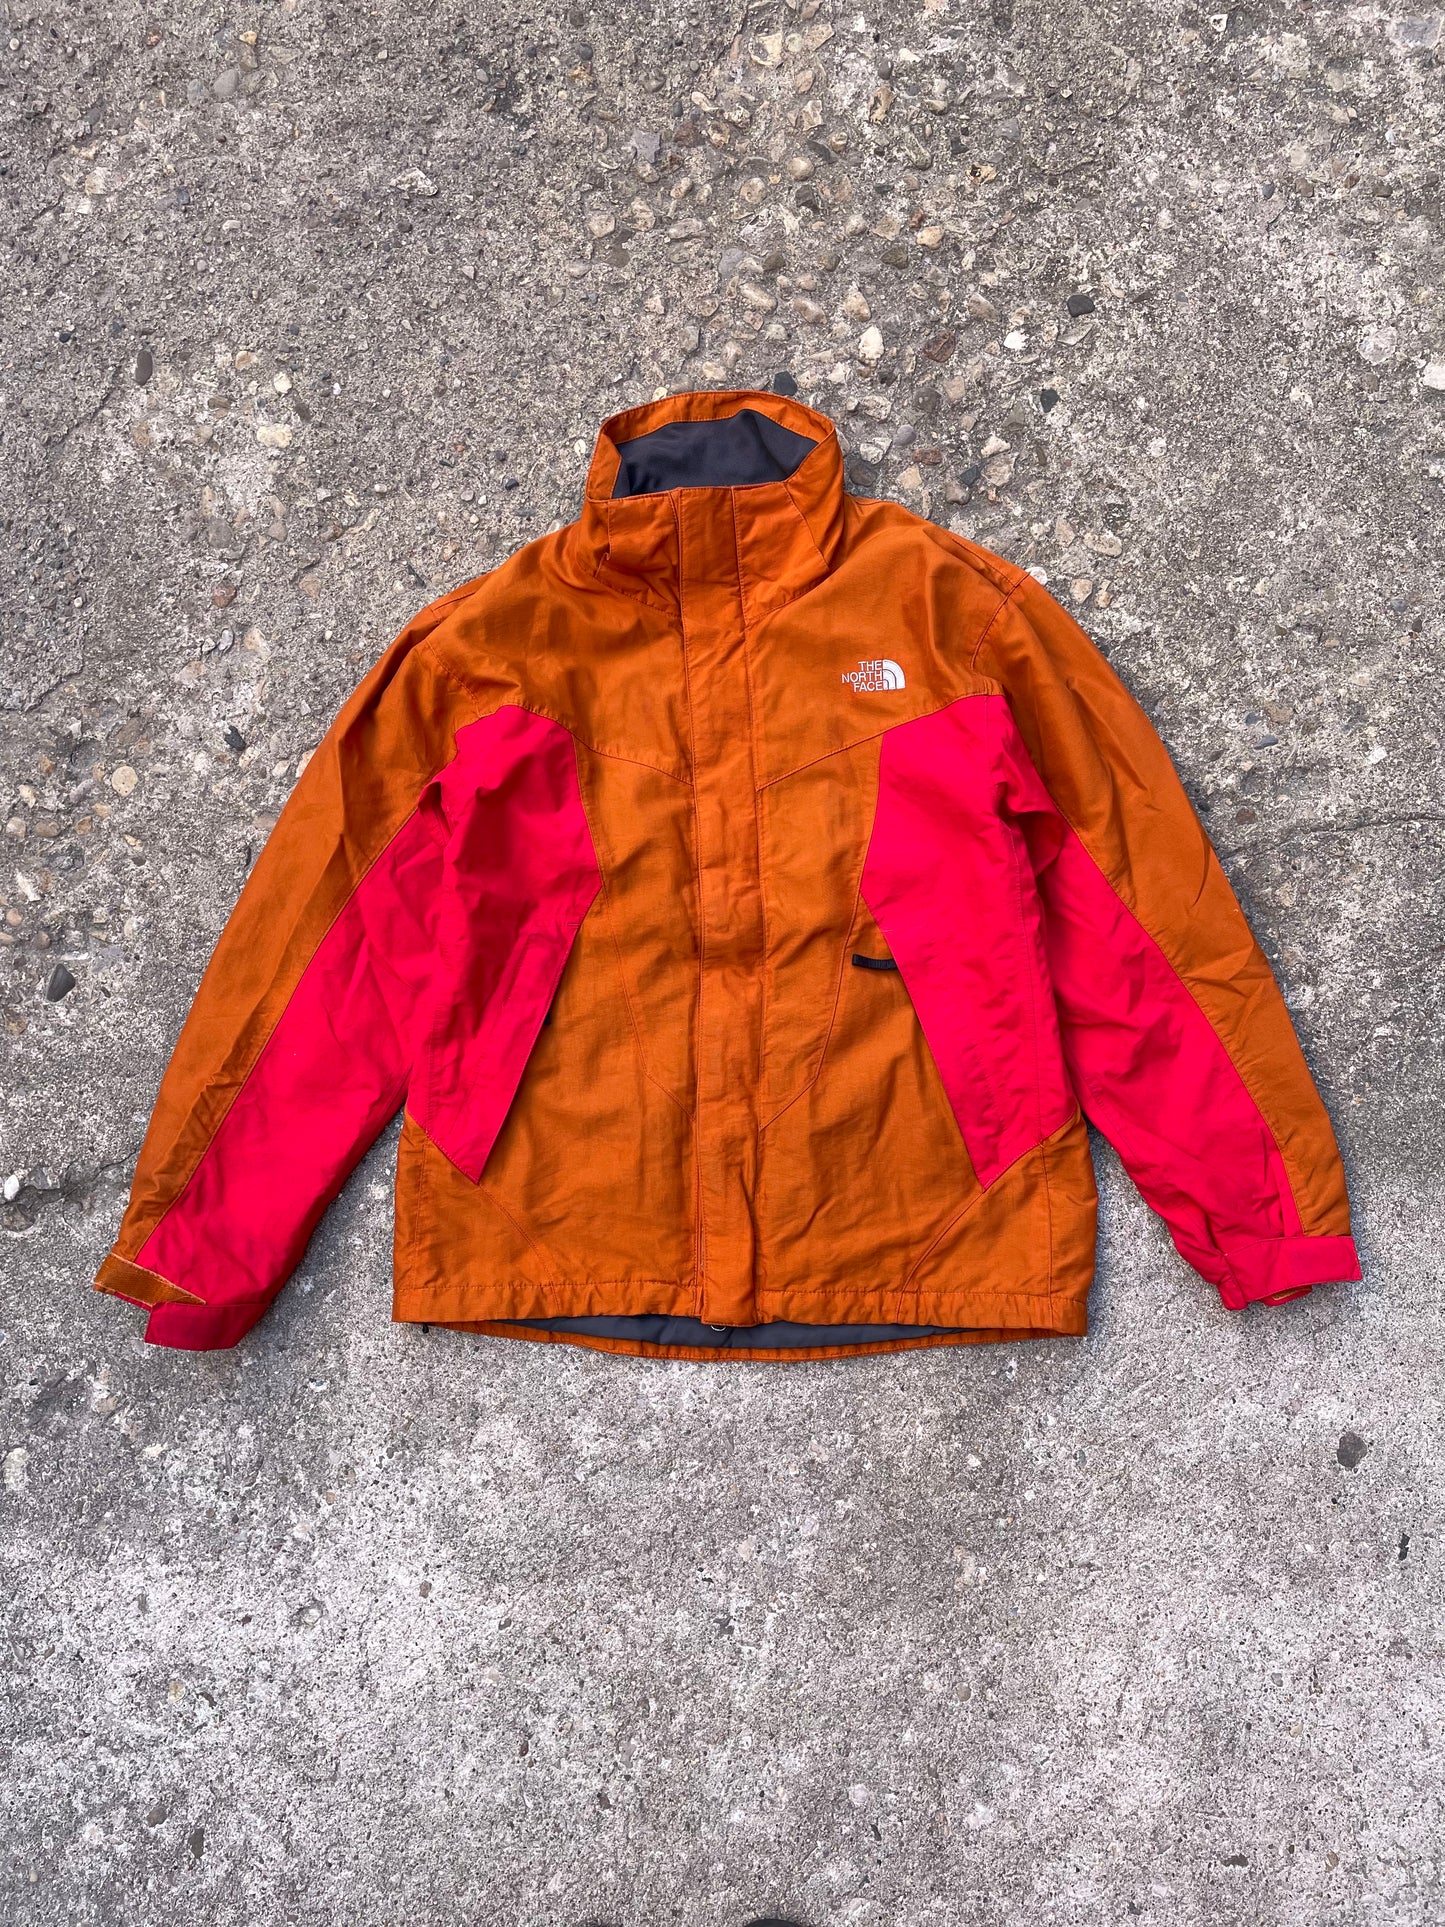 2000's The North Face Hyvent Shell Light Jacket - M